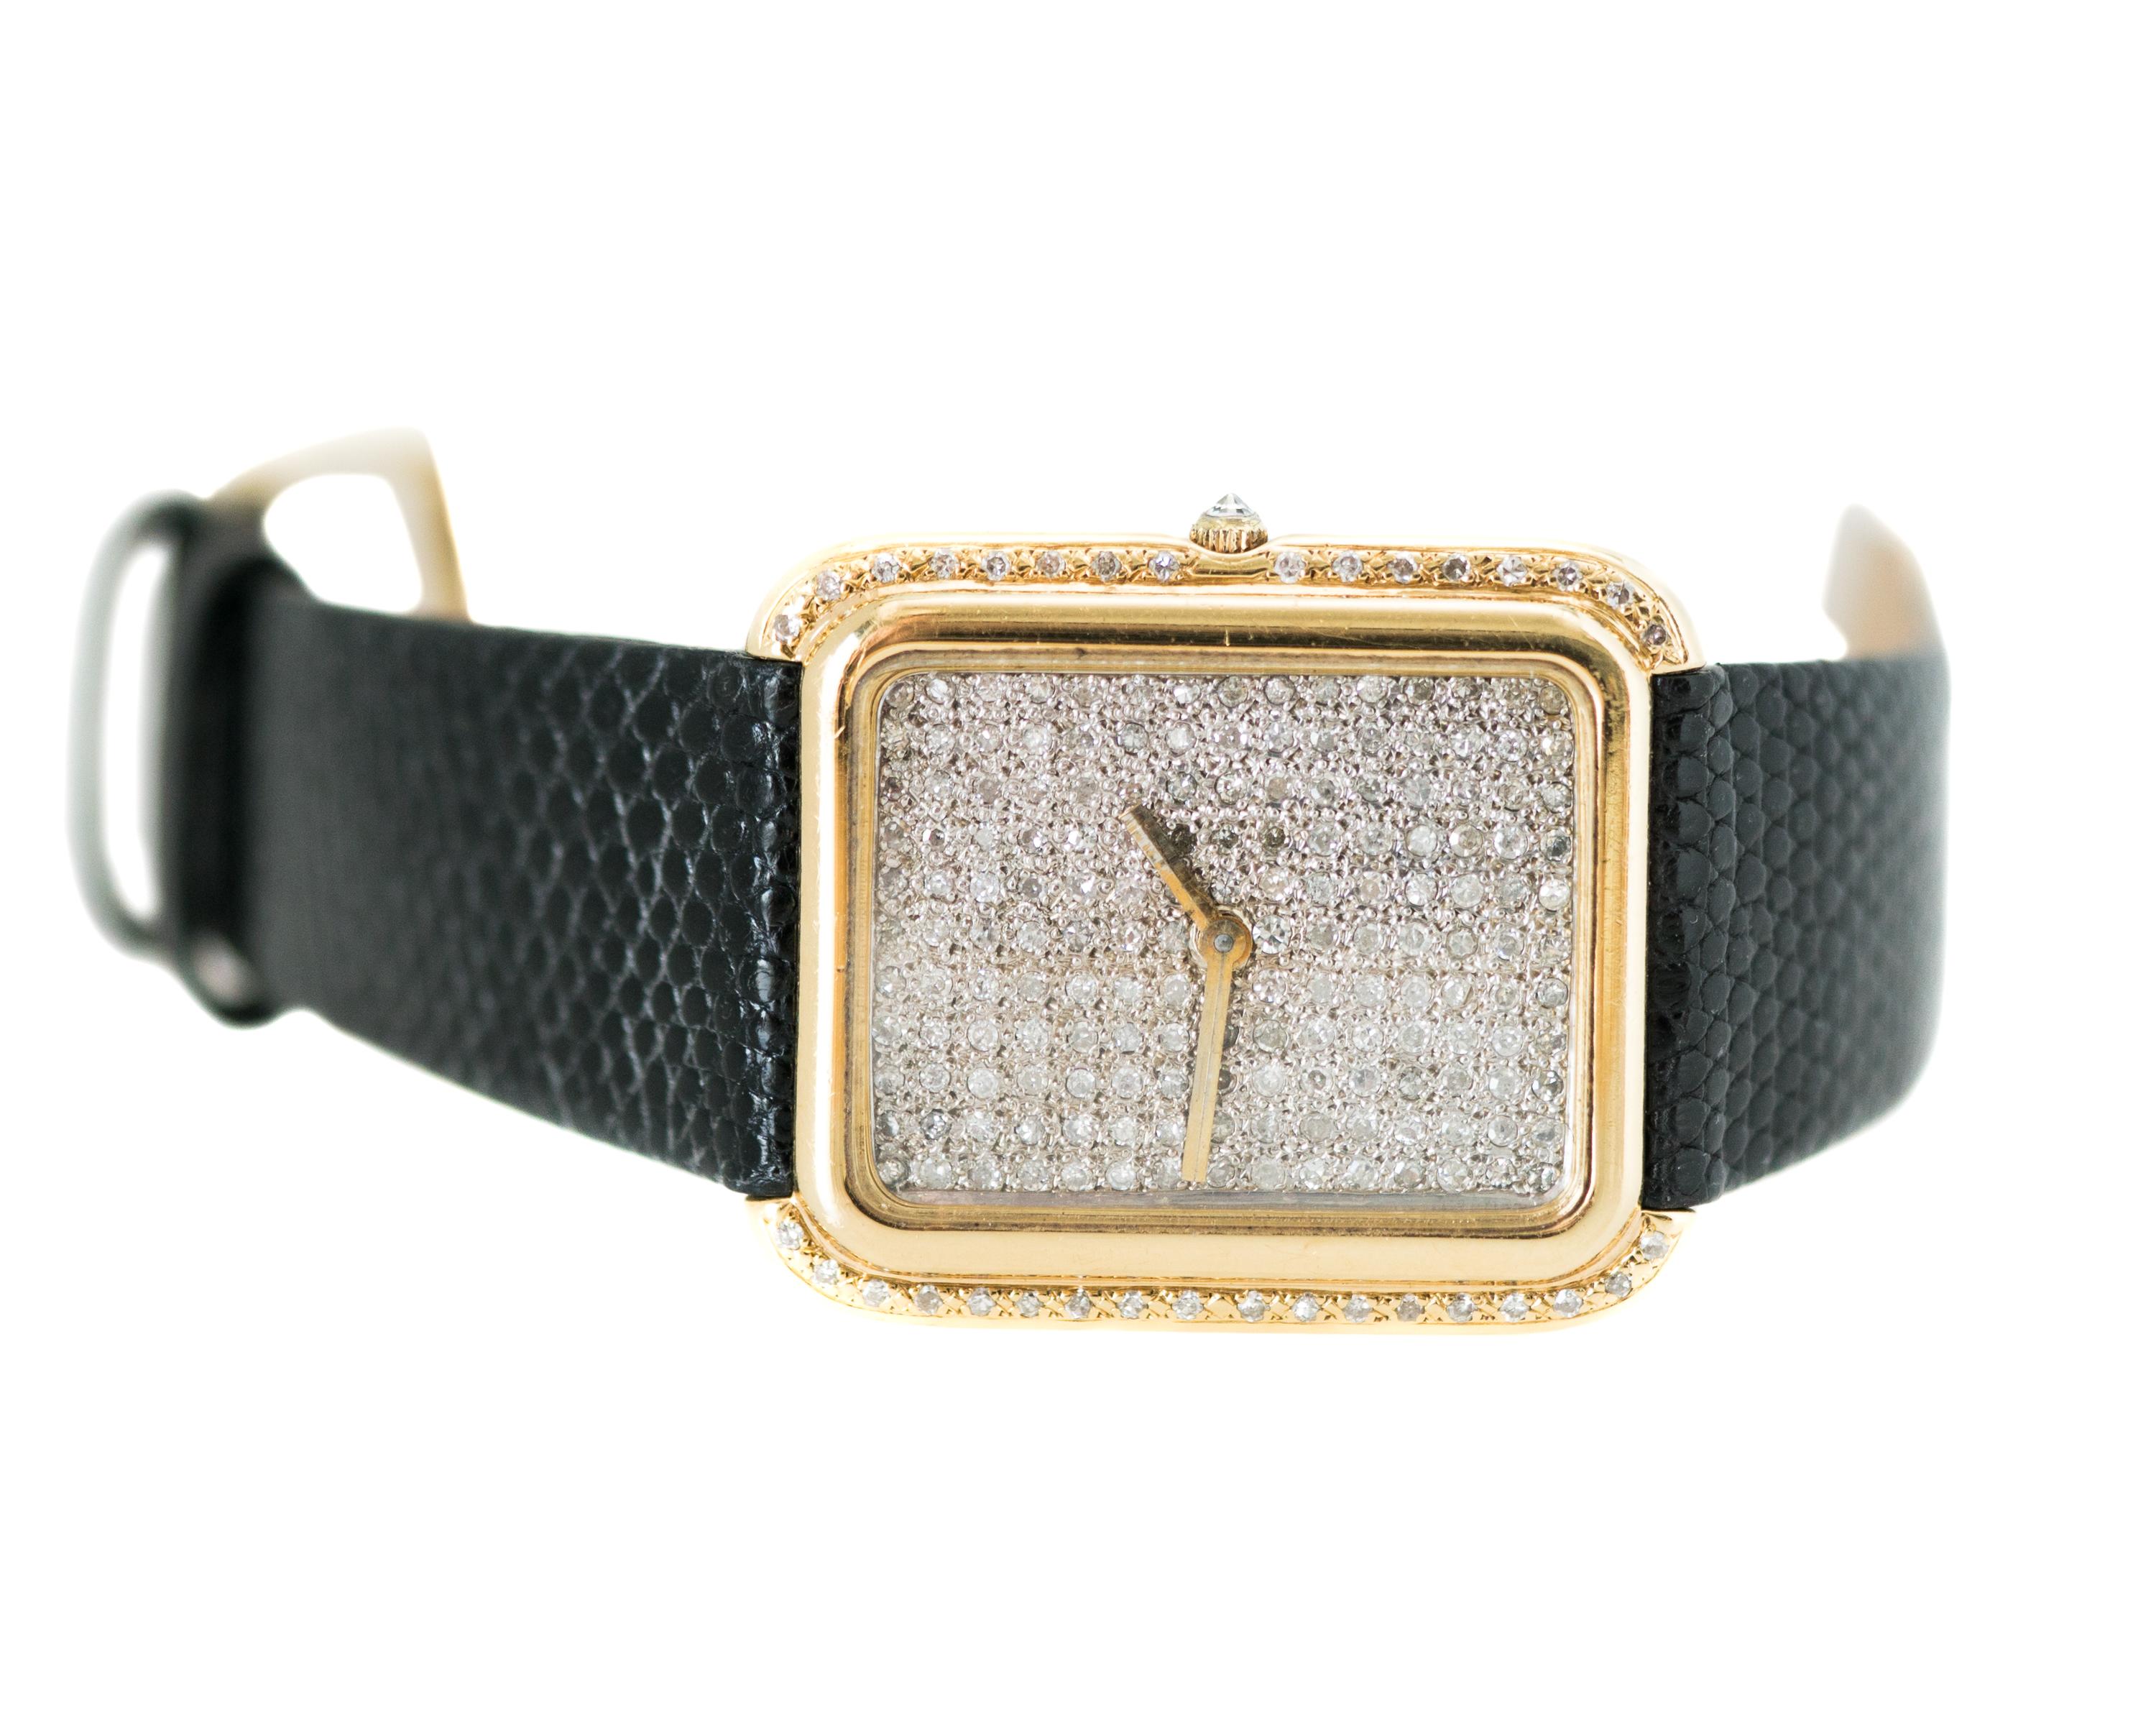 1970s Corum Diamond Watch - 18 Karat Yellow Gold, Diamonds

Features:
Custom Added 2.0 carat total Diamonds
18 Karat Yellow Gold Case 
Custom Genuine Lizard Strap
Case measures 35 x 30 millimeters without crown
Diamond Face
Gold Hour and Minute